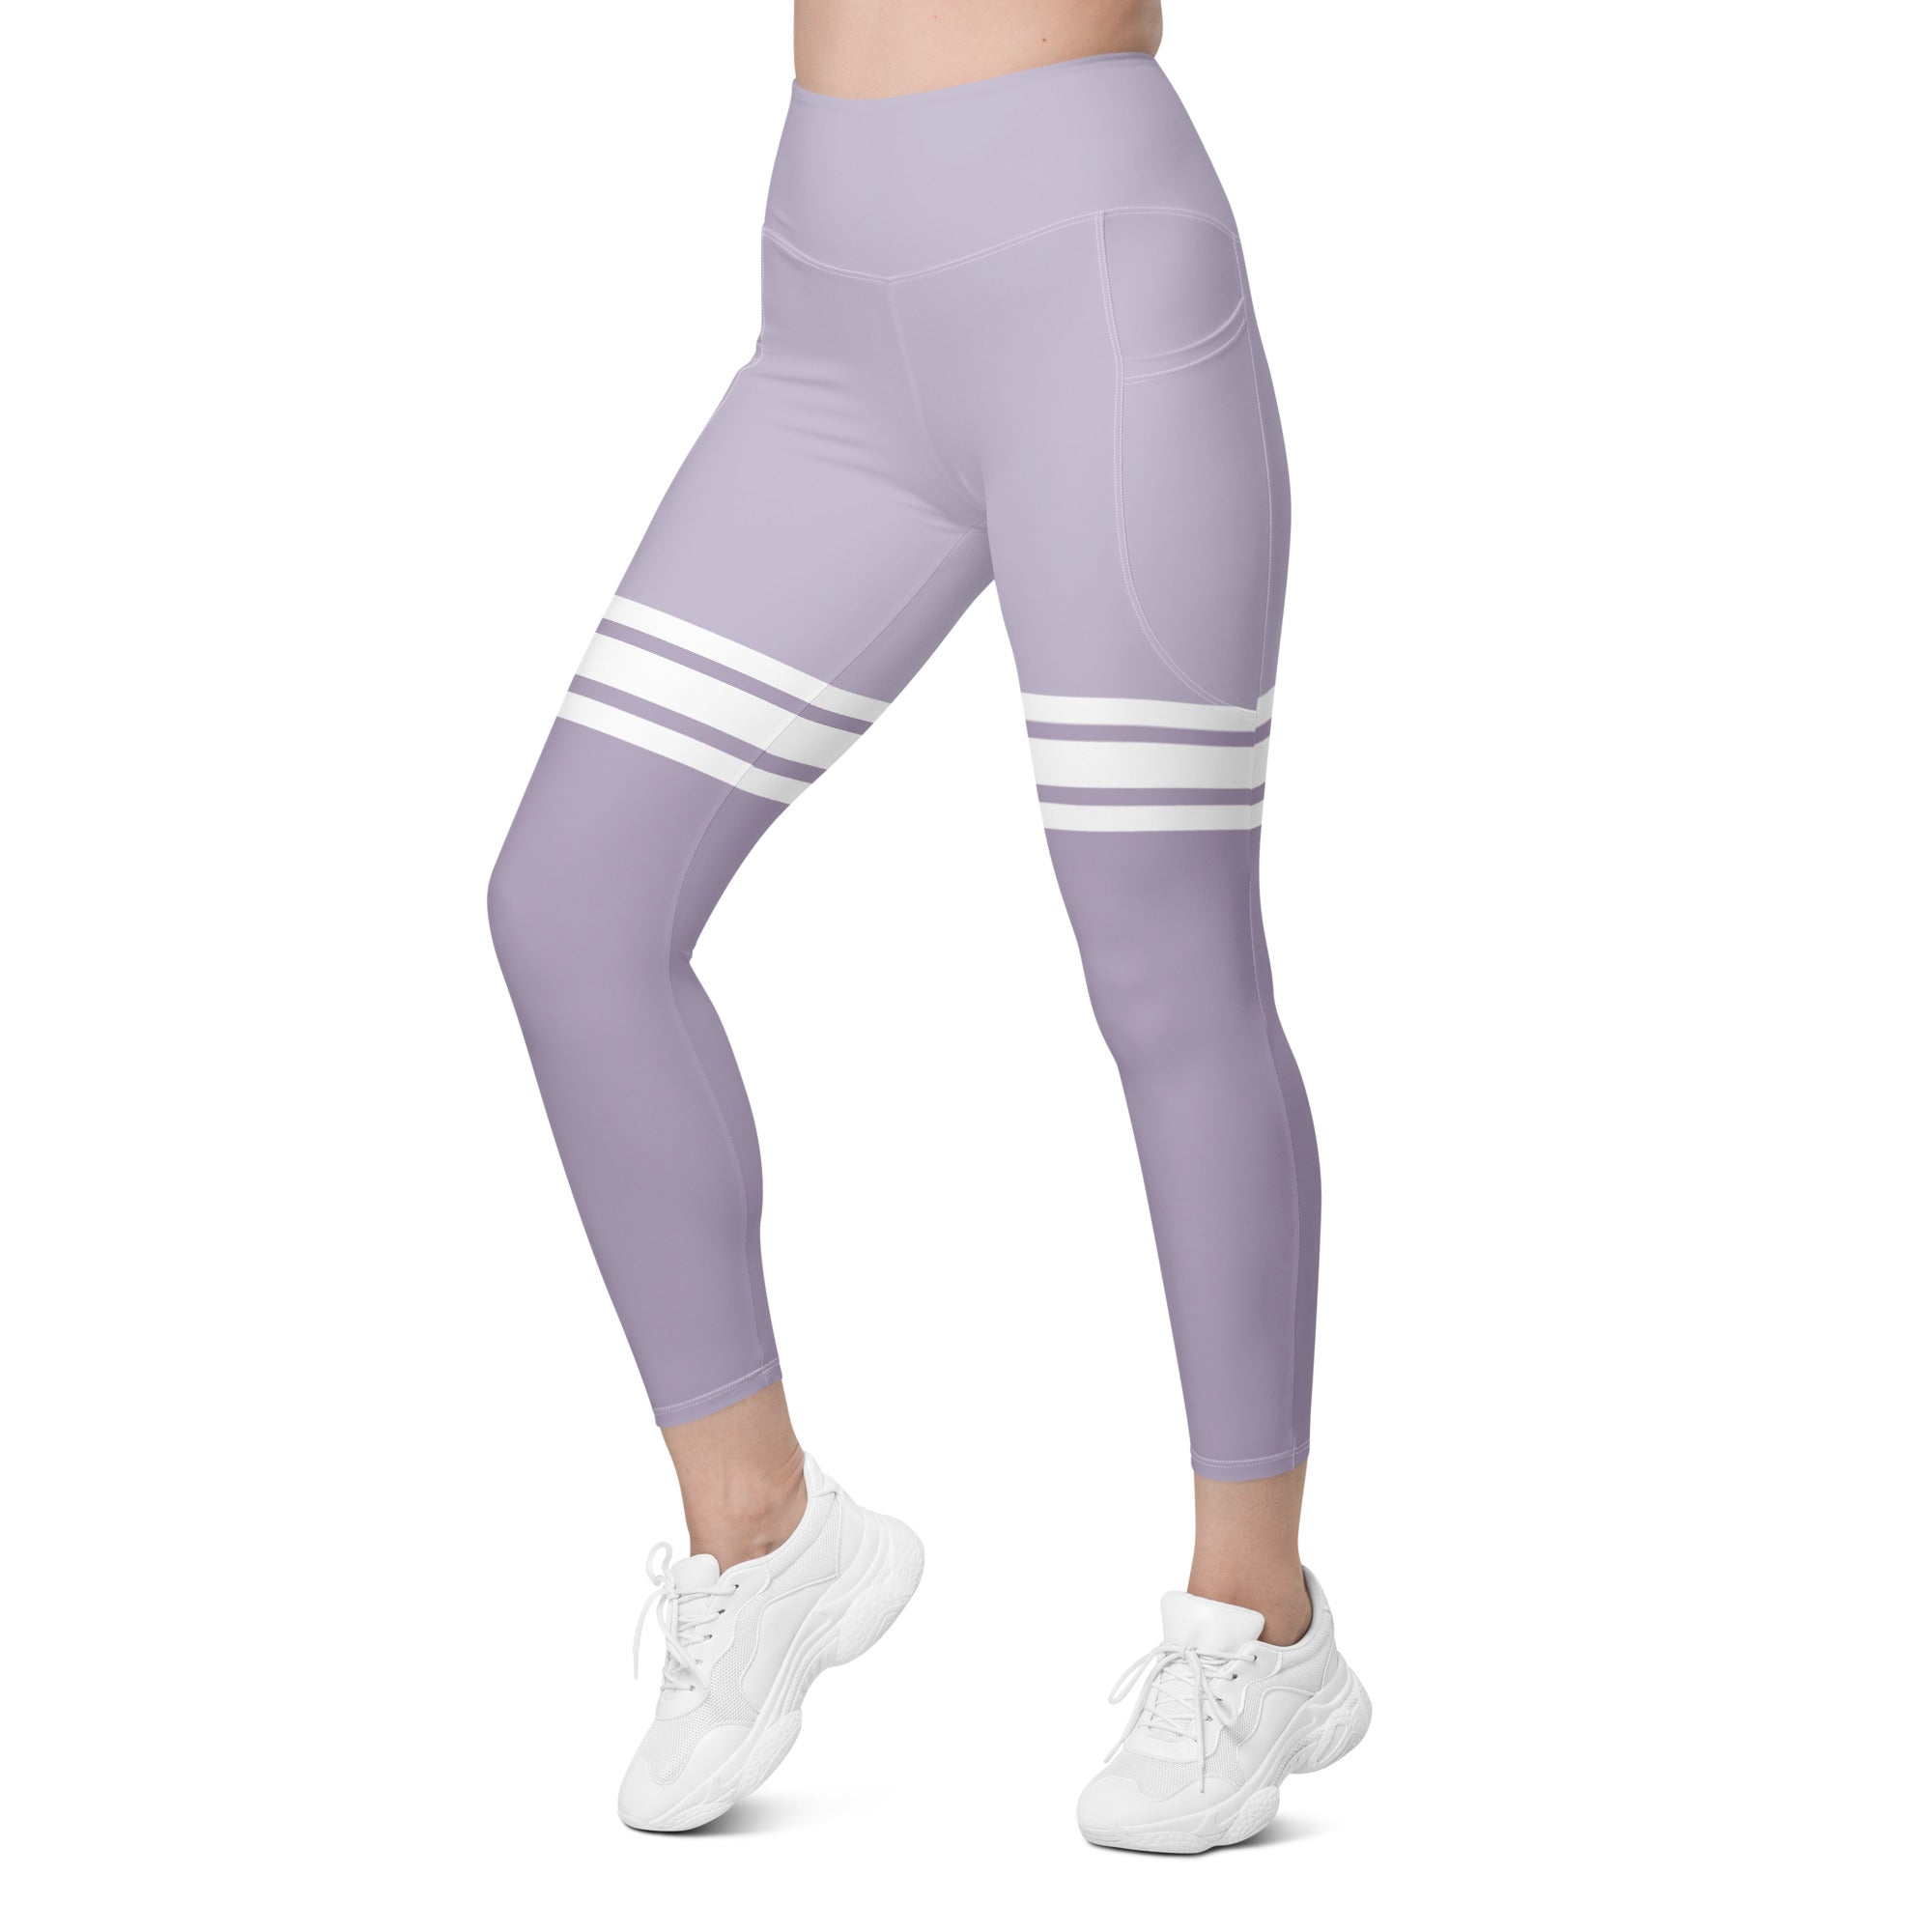 Vibrant color leggings with functional side pockets for workouts-girlstronginc.com